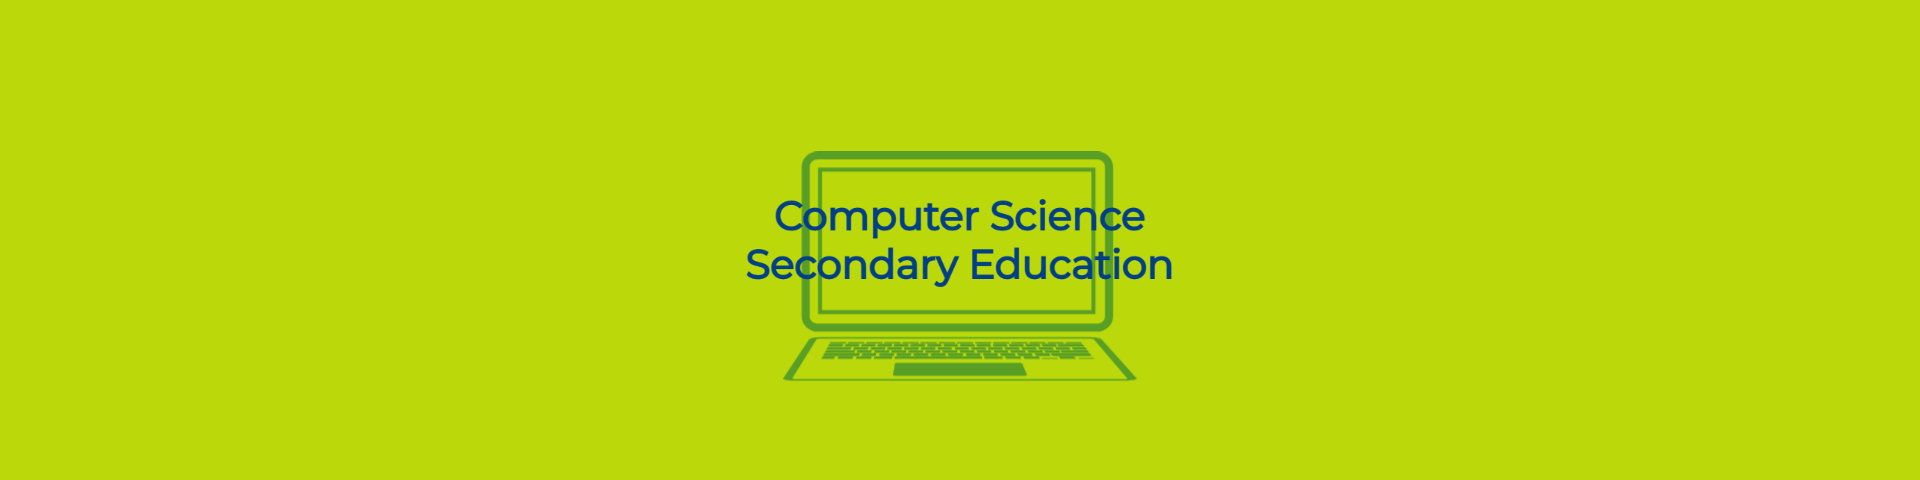 a computer with the words "Computer Science Secondary Education" embedded